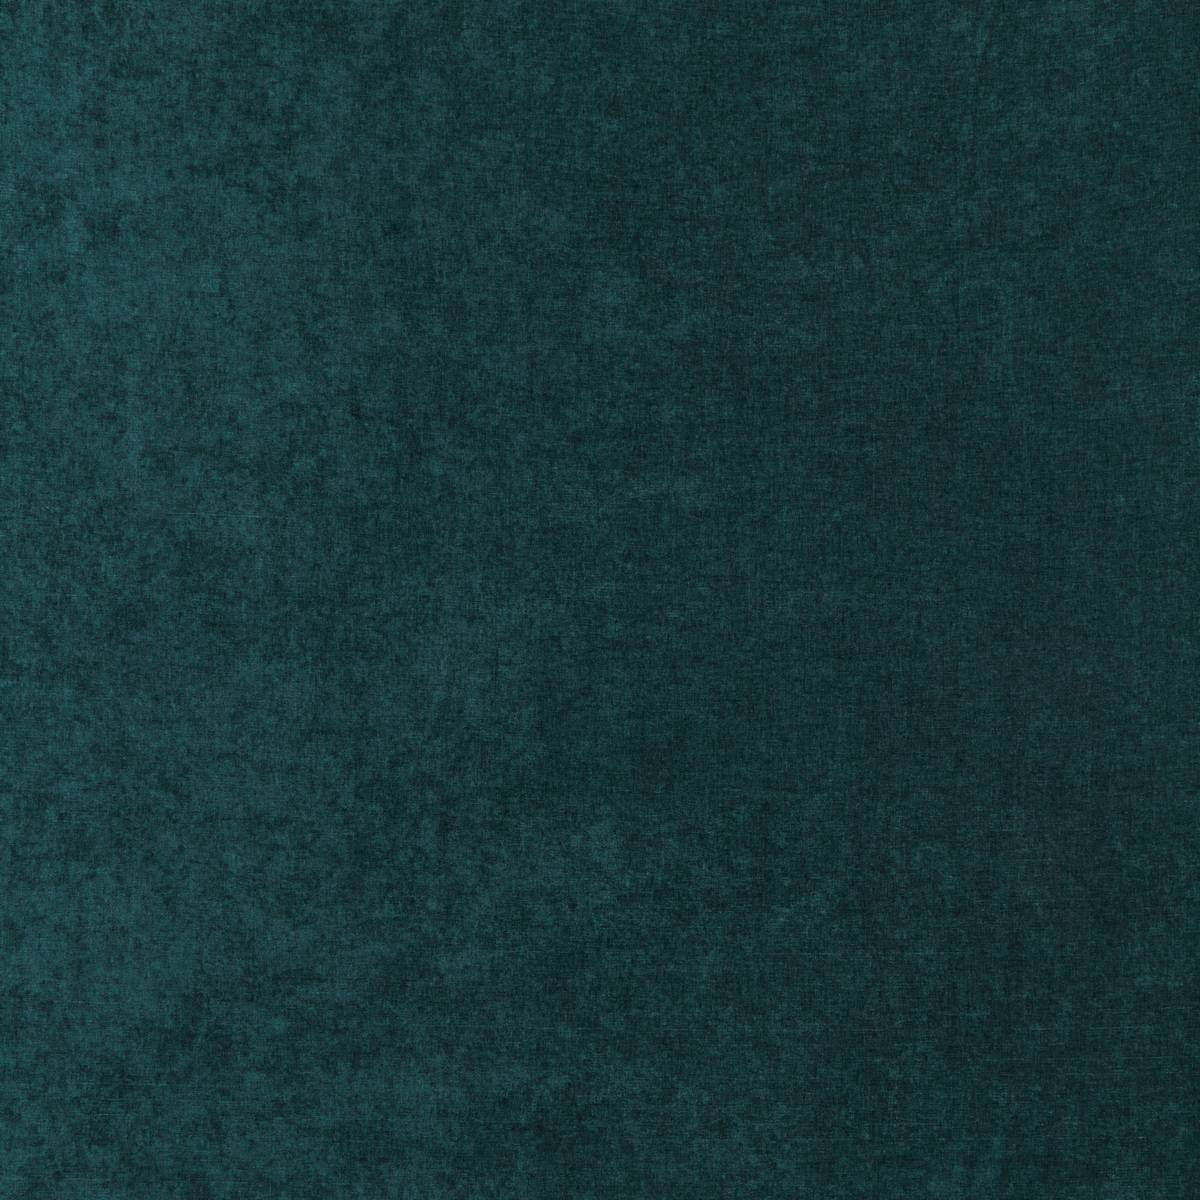 Belgravia Teal Fabric by iLiv